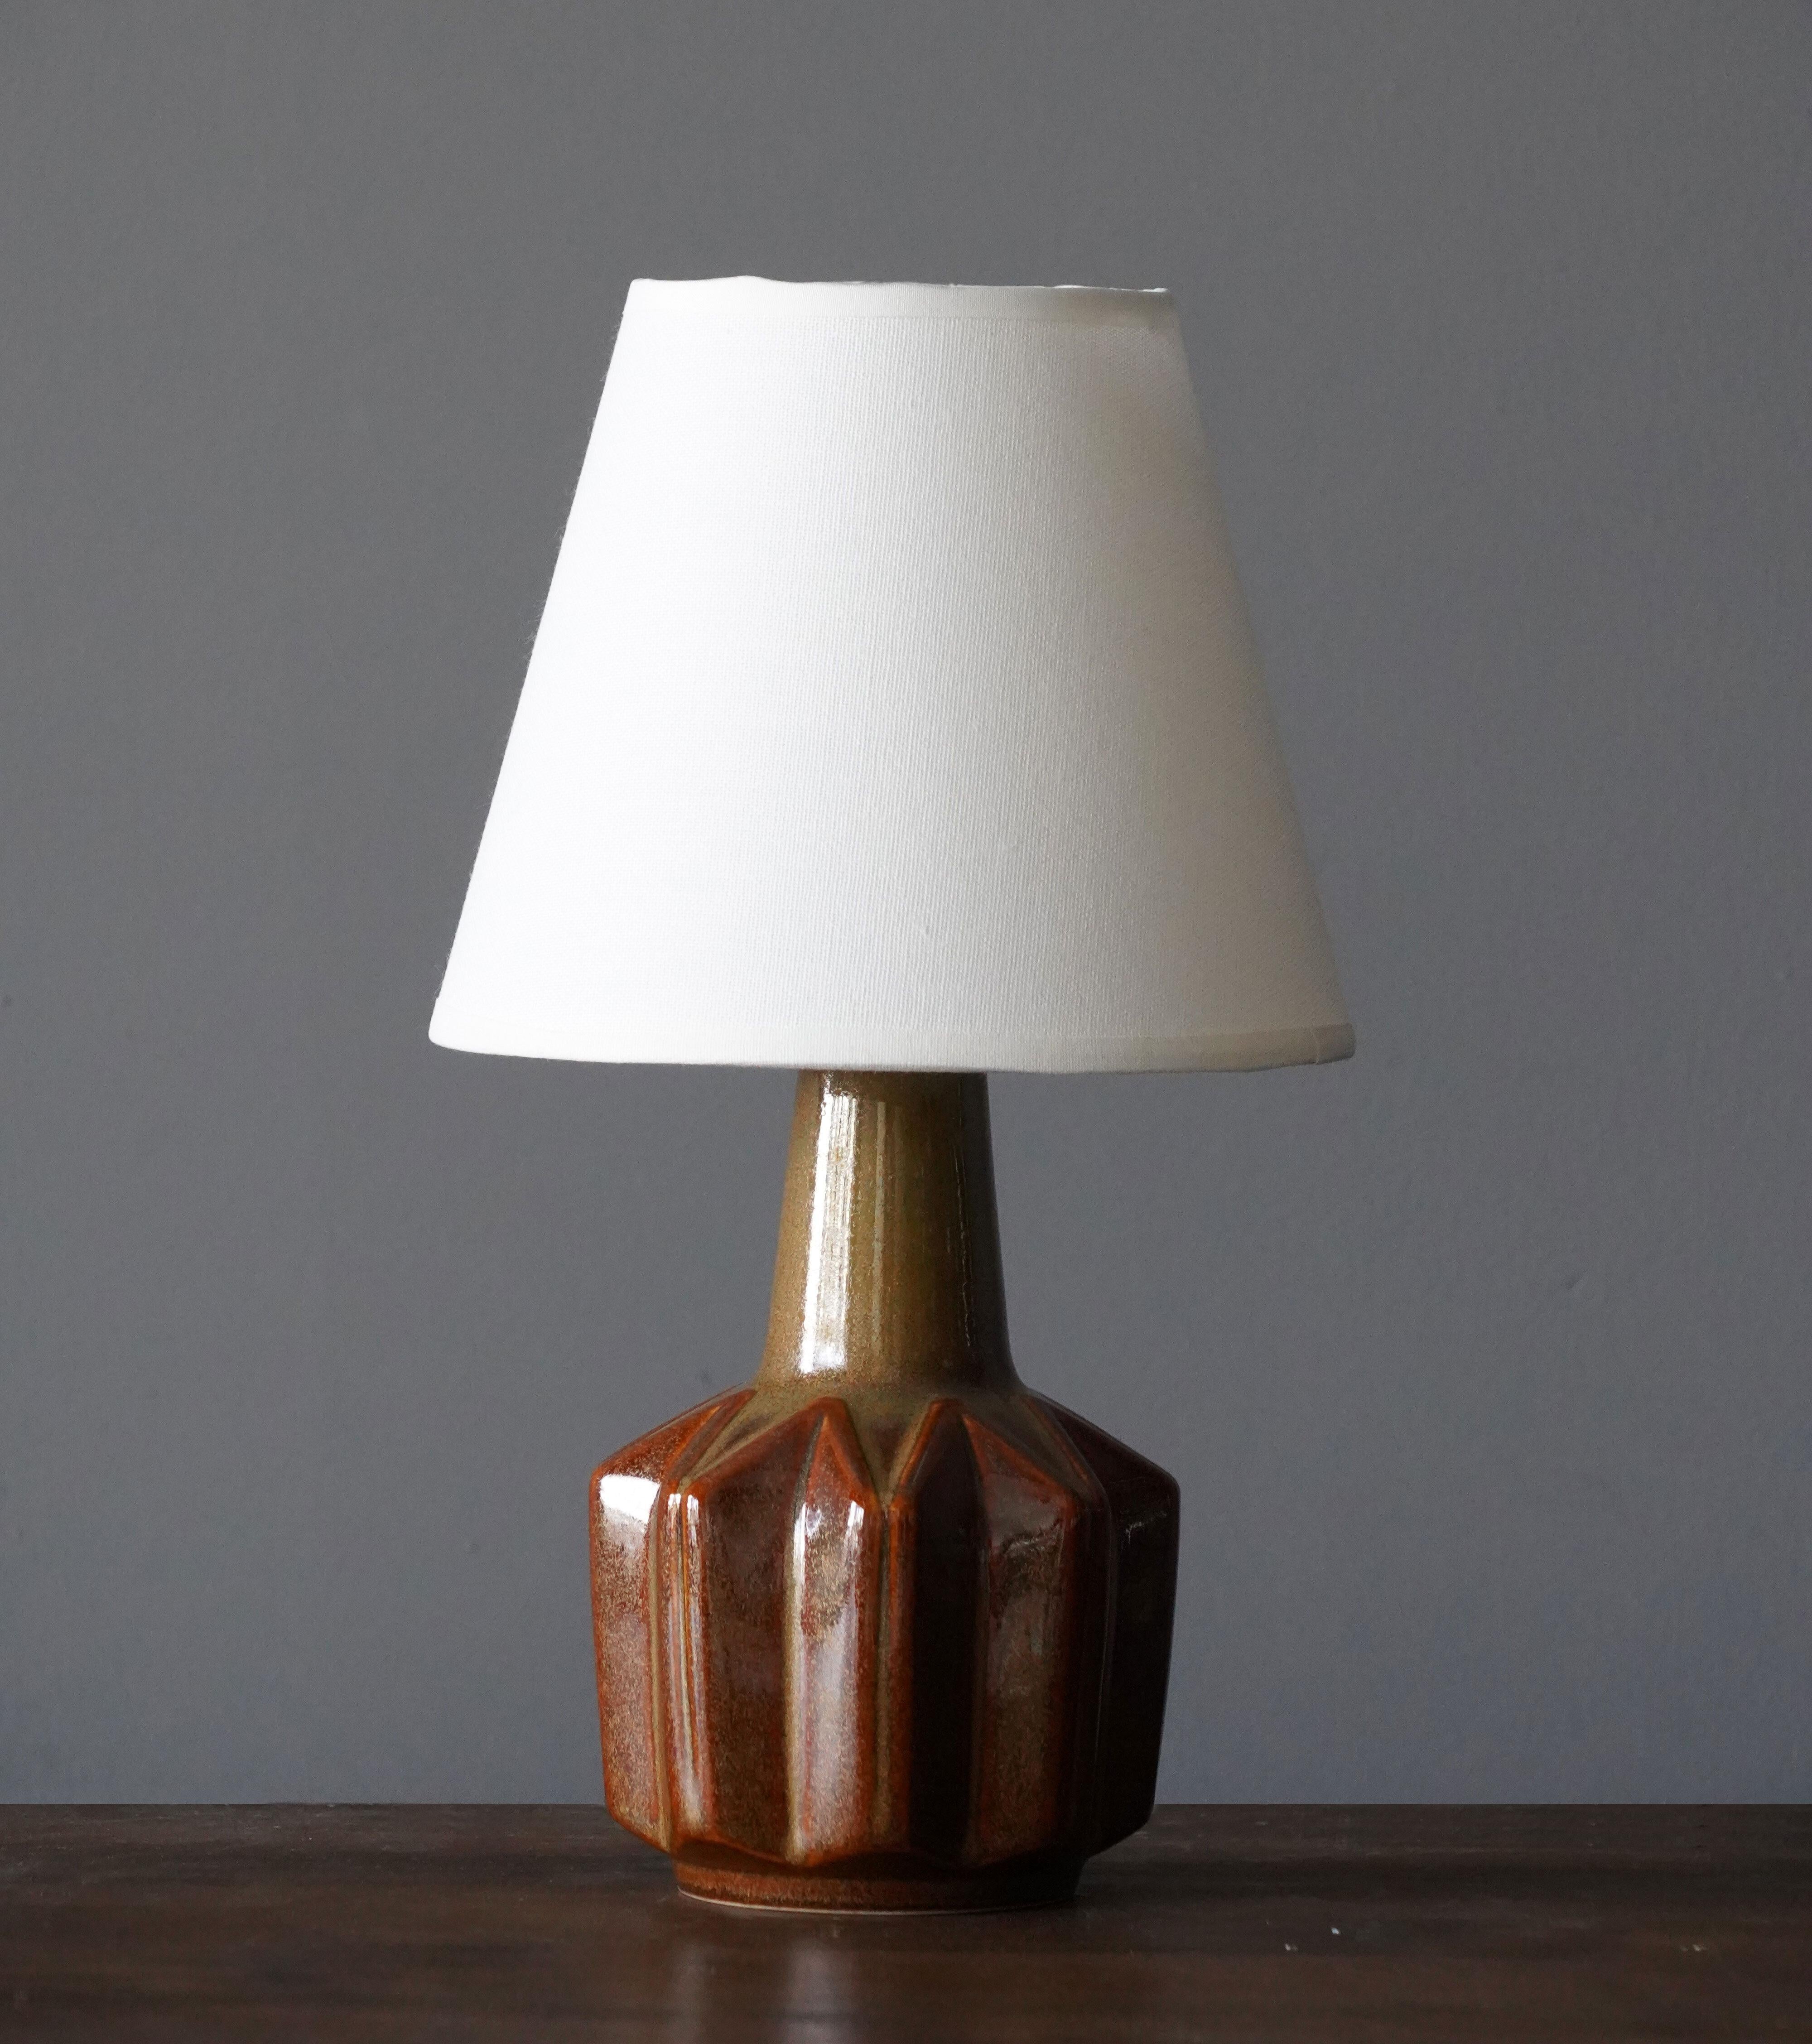 A small table lamp produced by Søholm Keramik, located on the island of Bornholm in Denmark. 

Lampshade is attached for reference and are not included in the purchase. Measured without lampshade.

Glaze features brown-beige-green colors.

Other